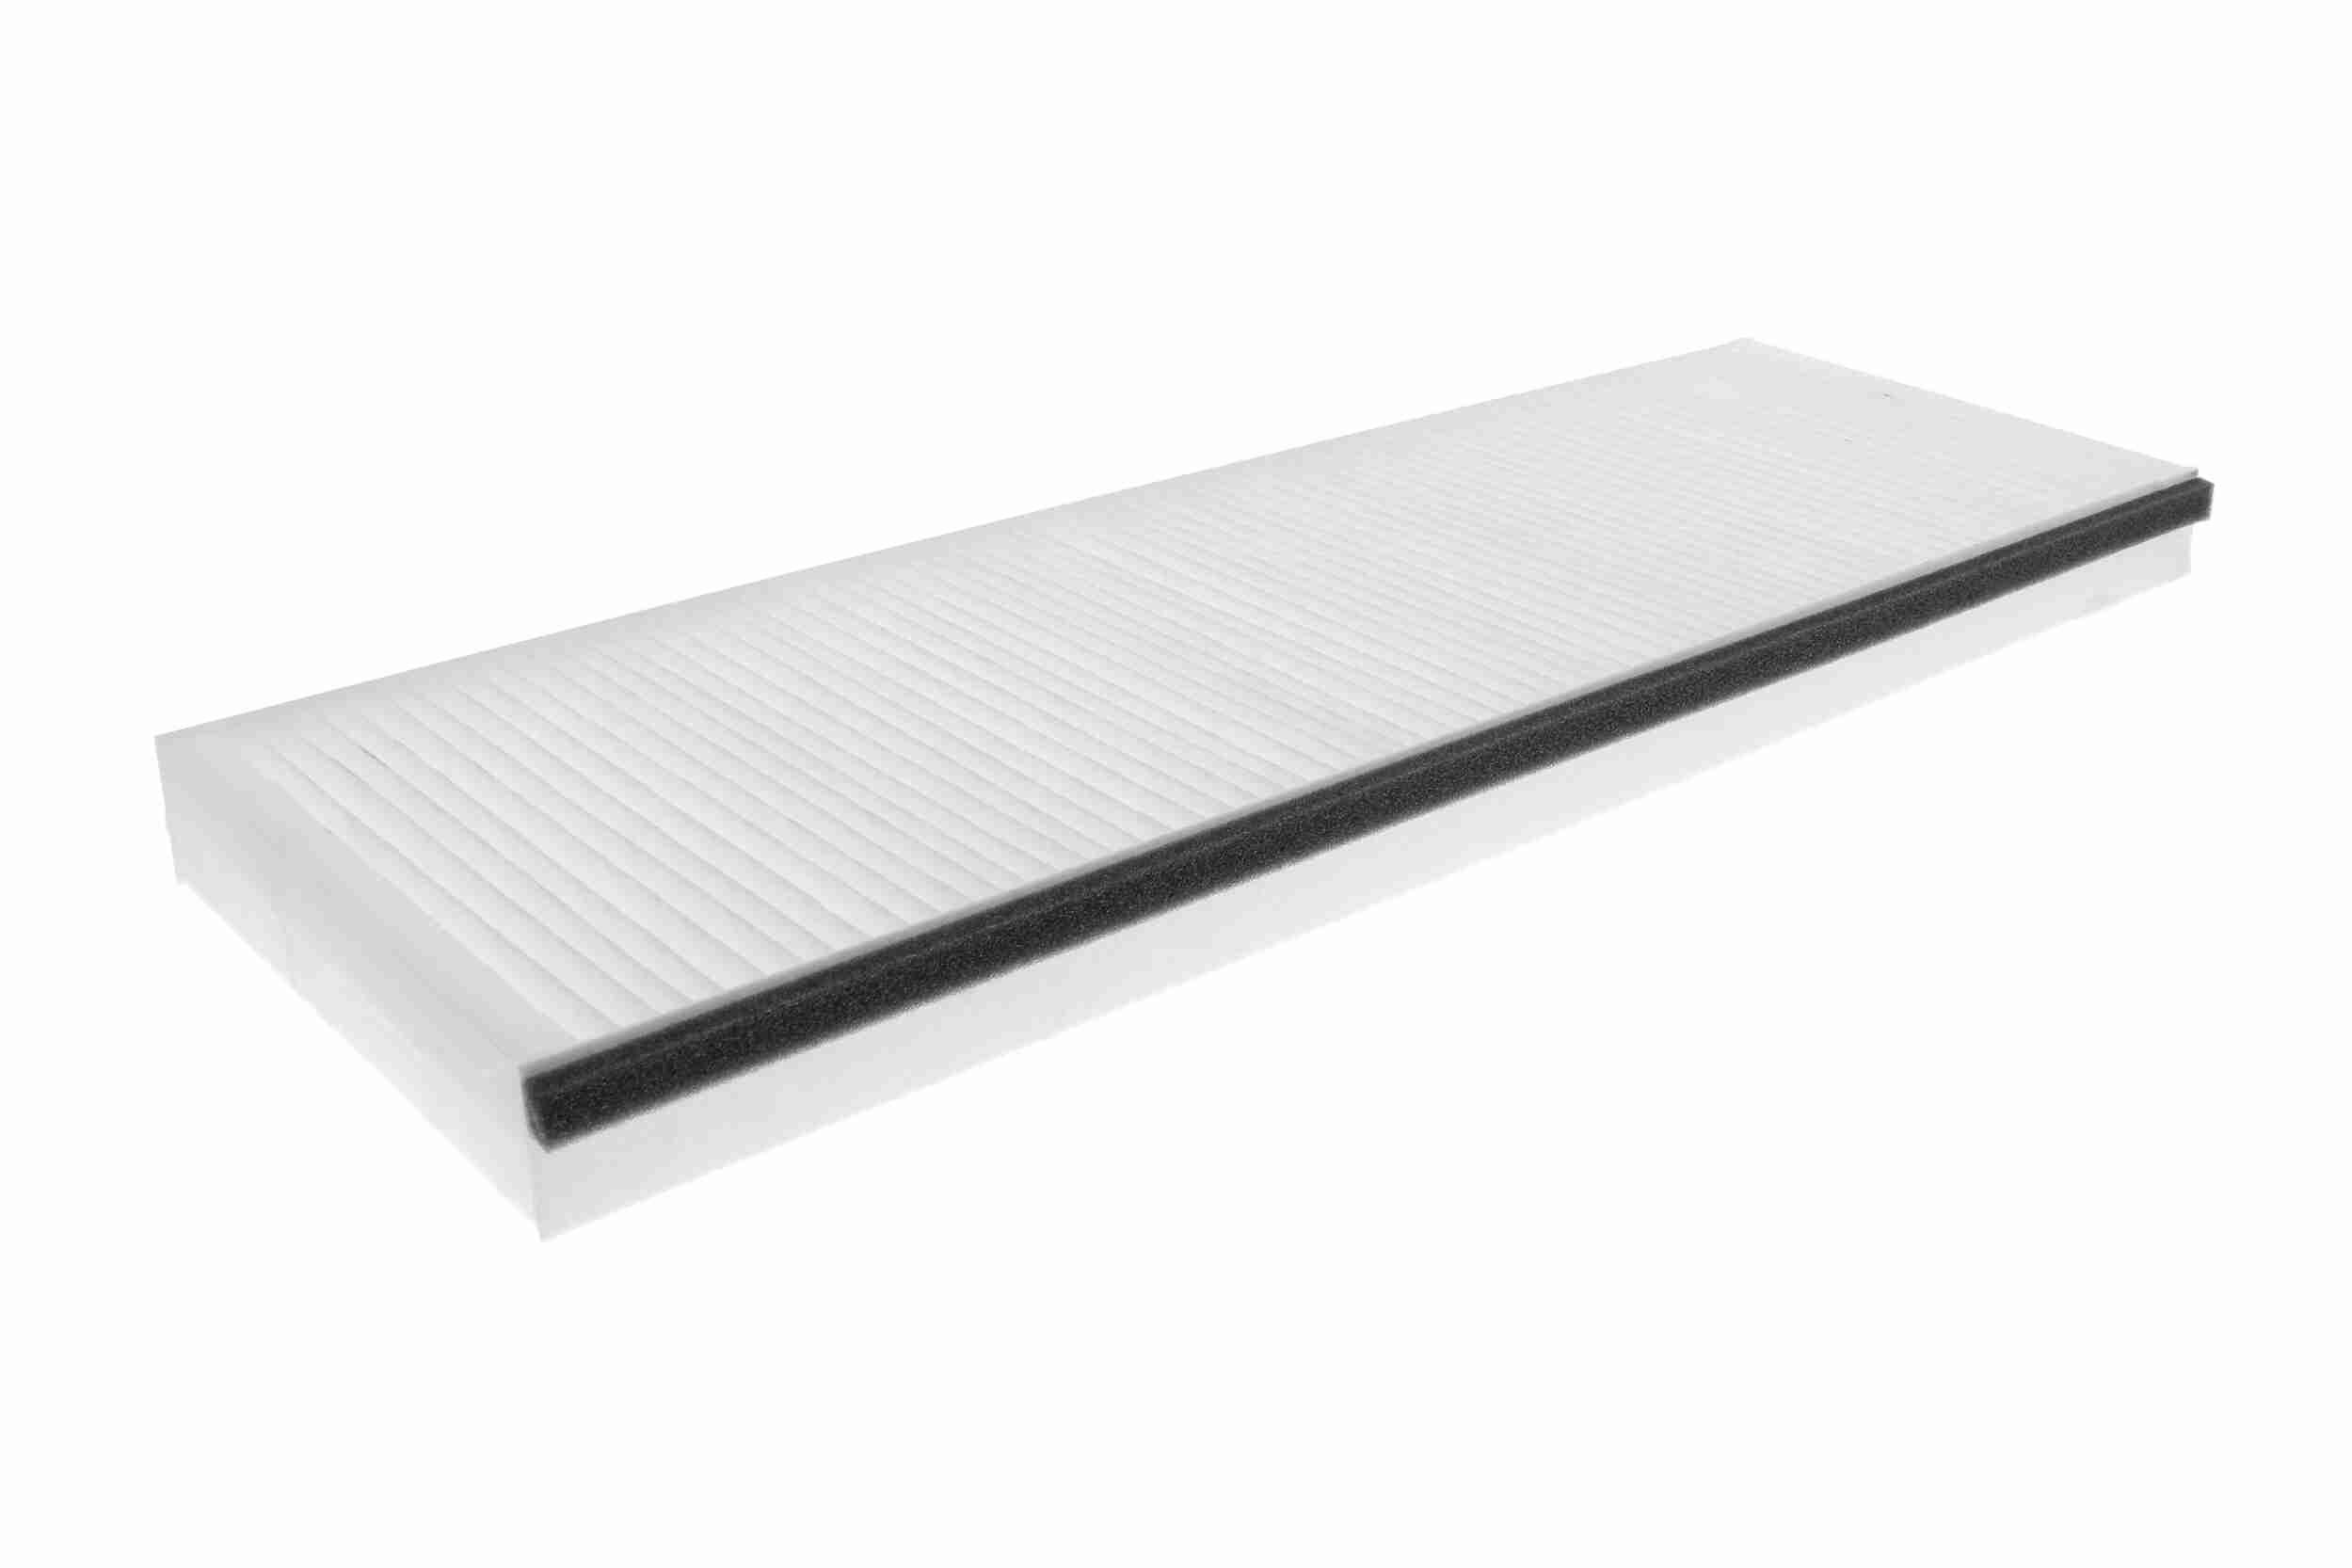 VEMO Particulate Filter, 456 mm x 153 mm x 30 mm, Paper, Original VEMO Quality Width: 153mm, Height: 30mm, Length: 456mm Cabin filter V31-30-0003 buy